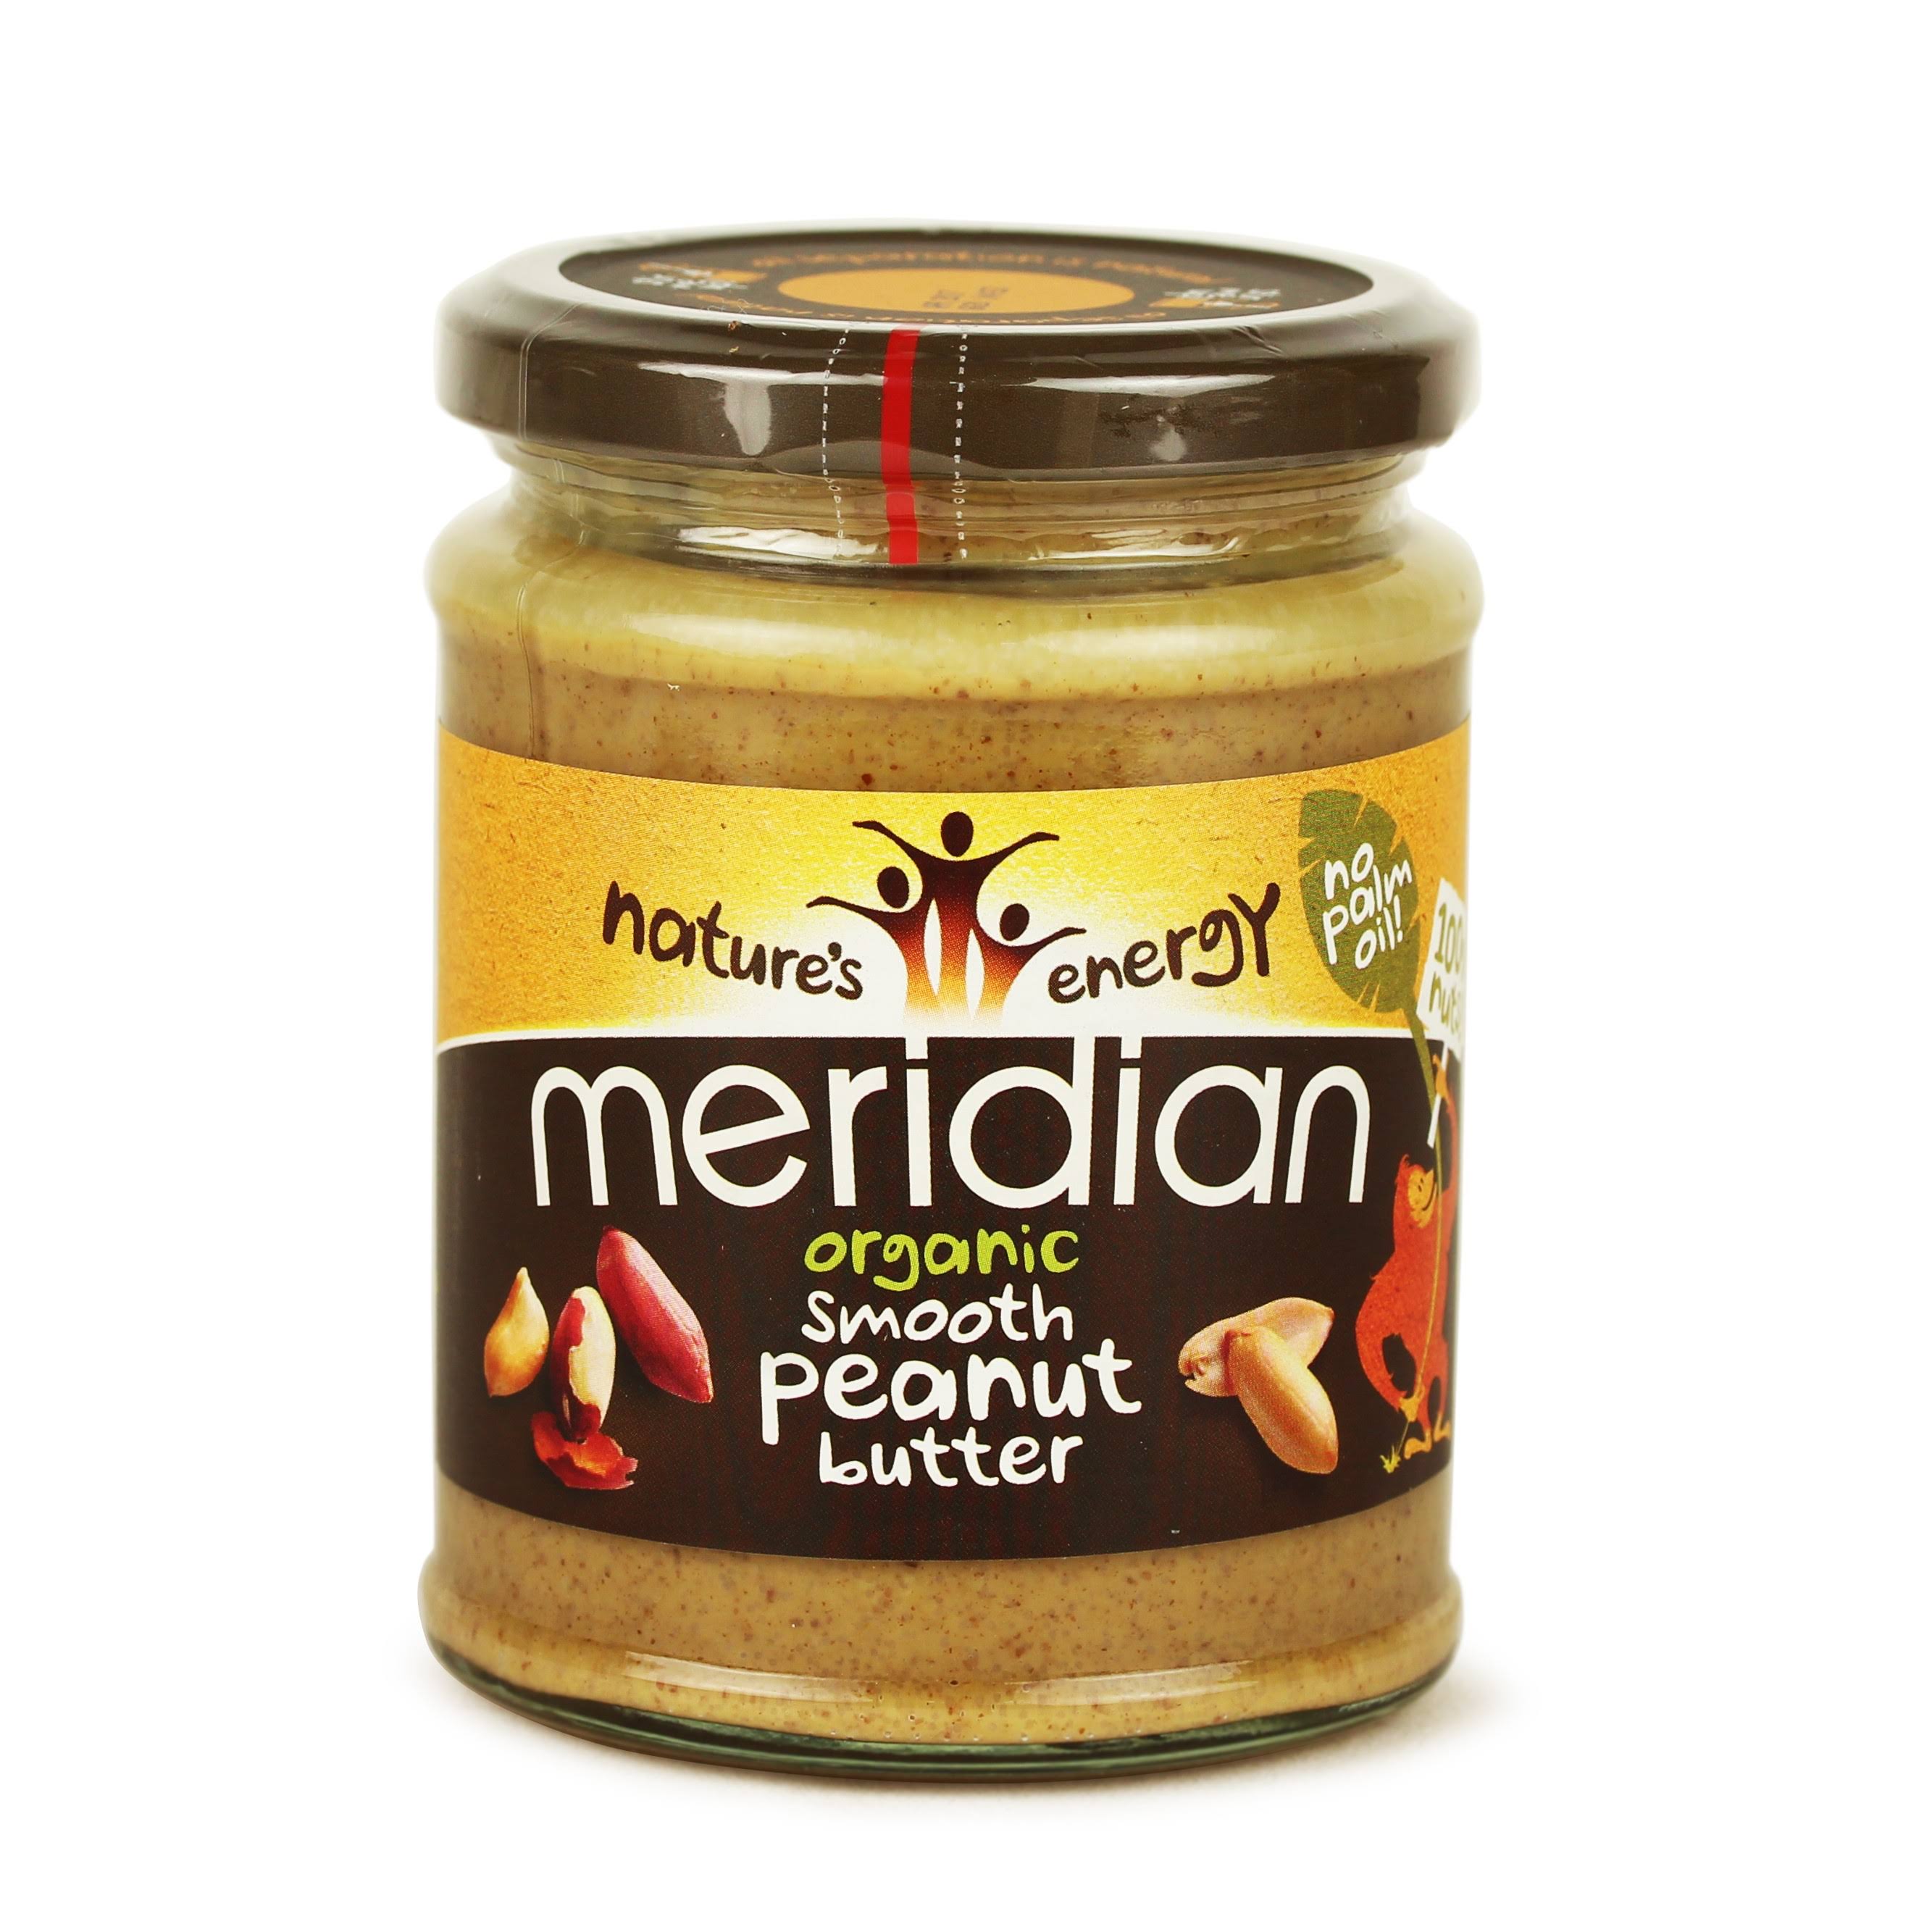 Natures Energy Meridian Organic Smooth Peanut Butter - 280g